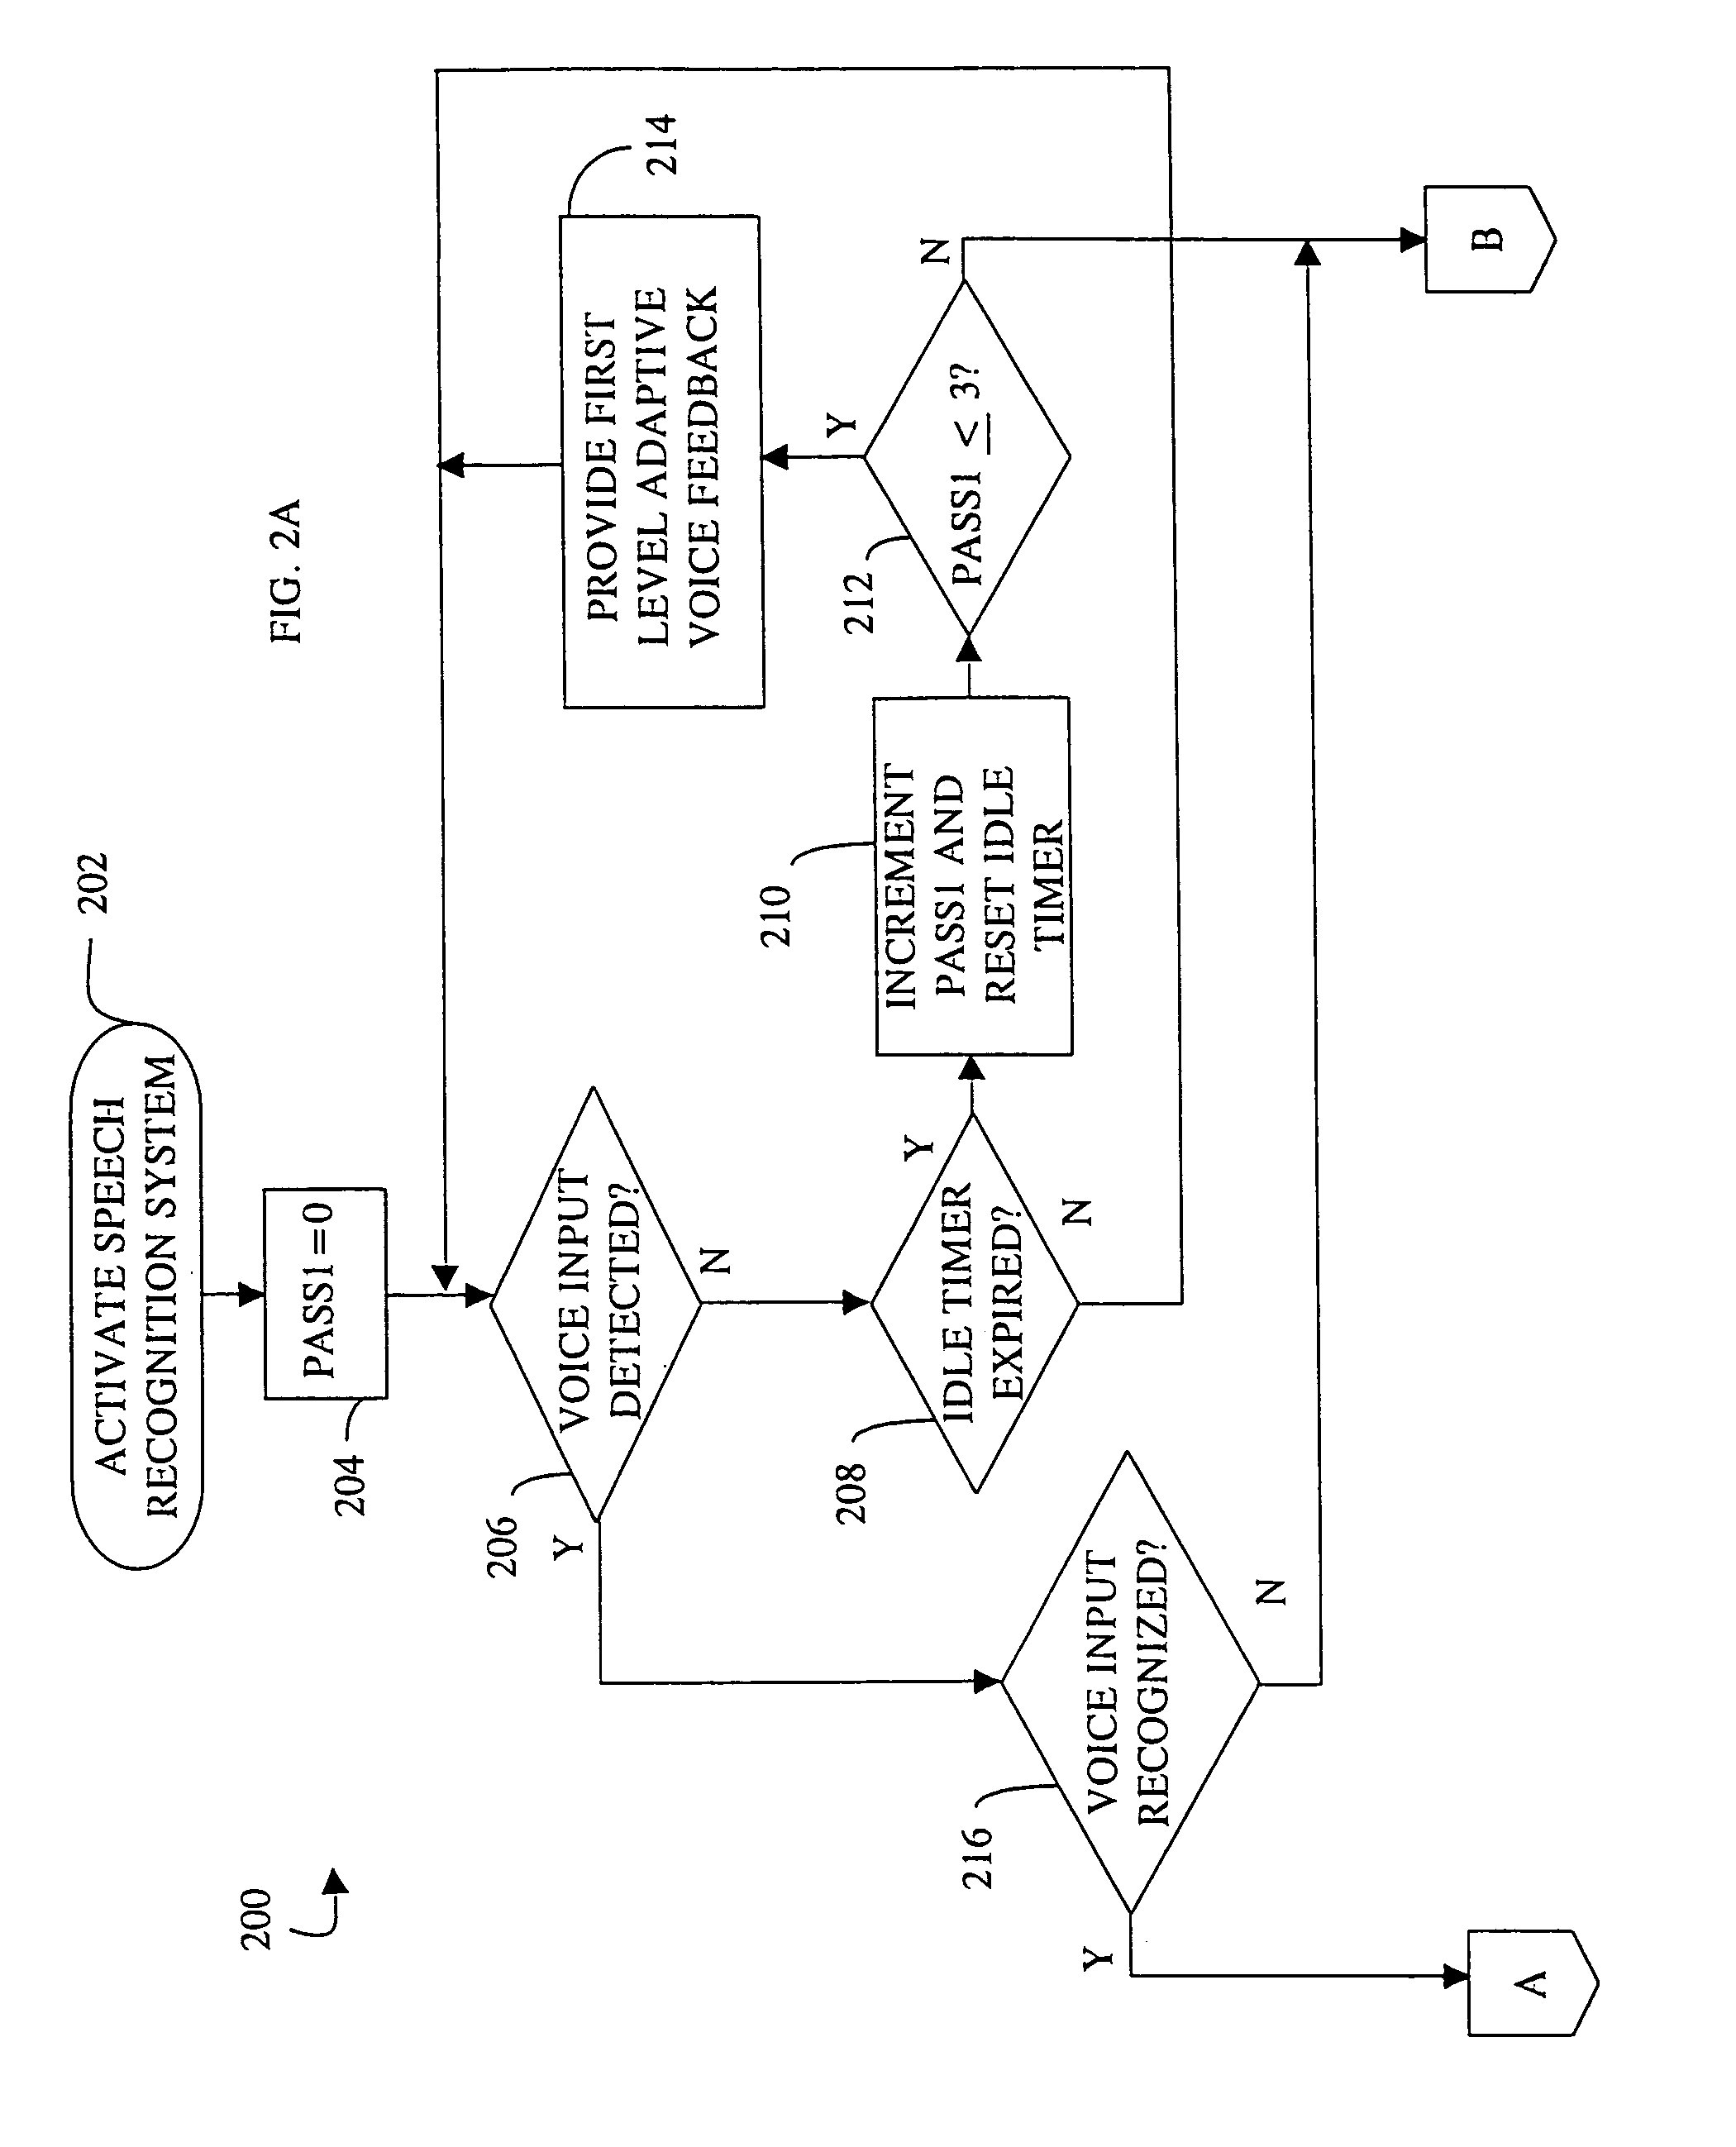 Speech recognition with user specific adaptive voice feedback